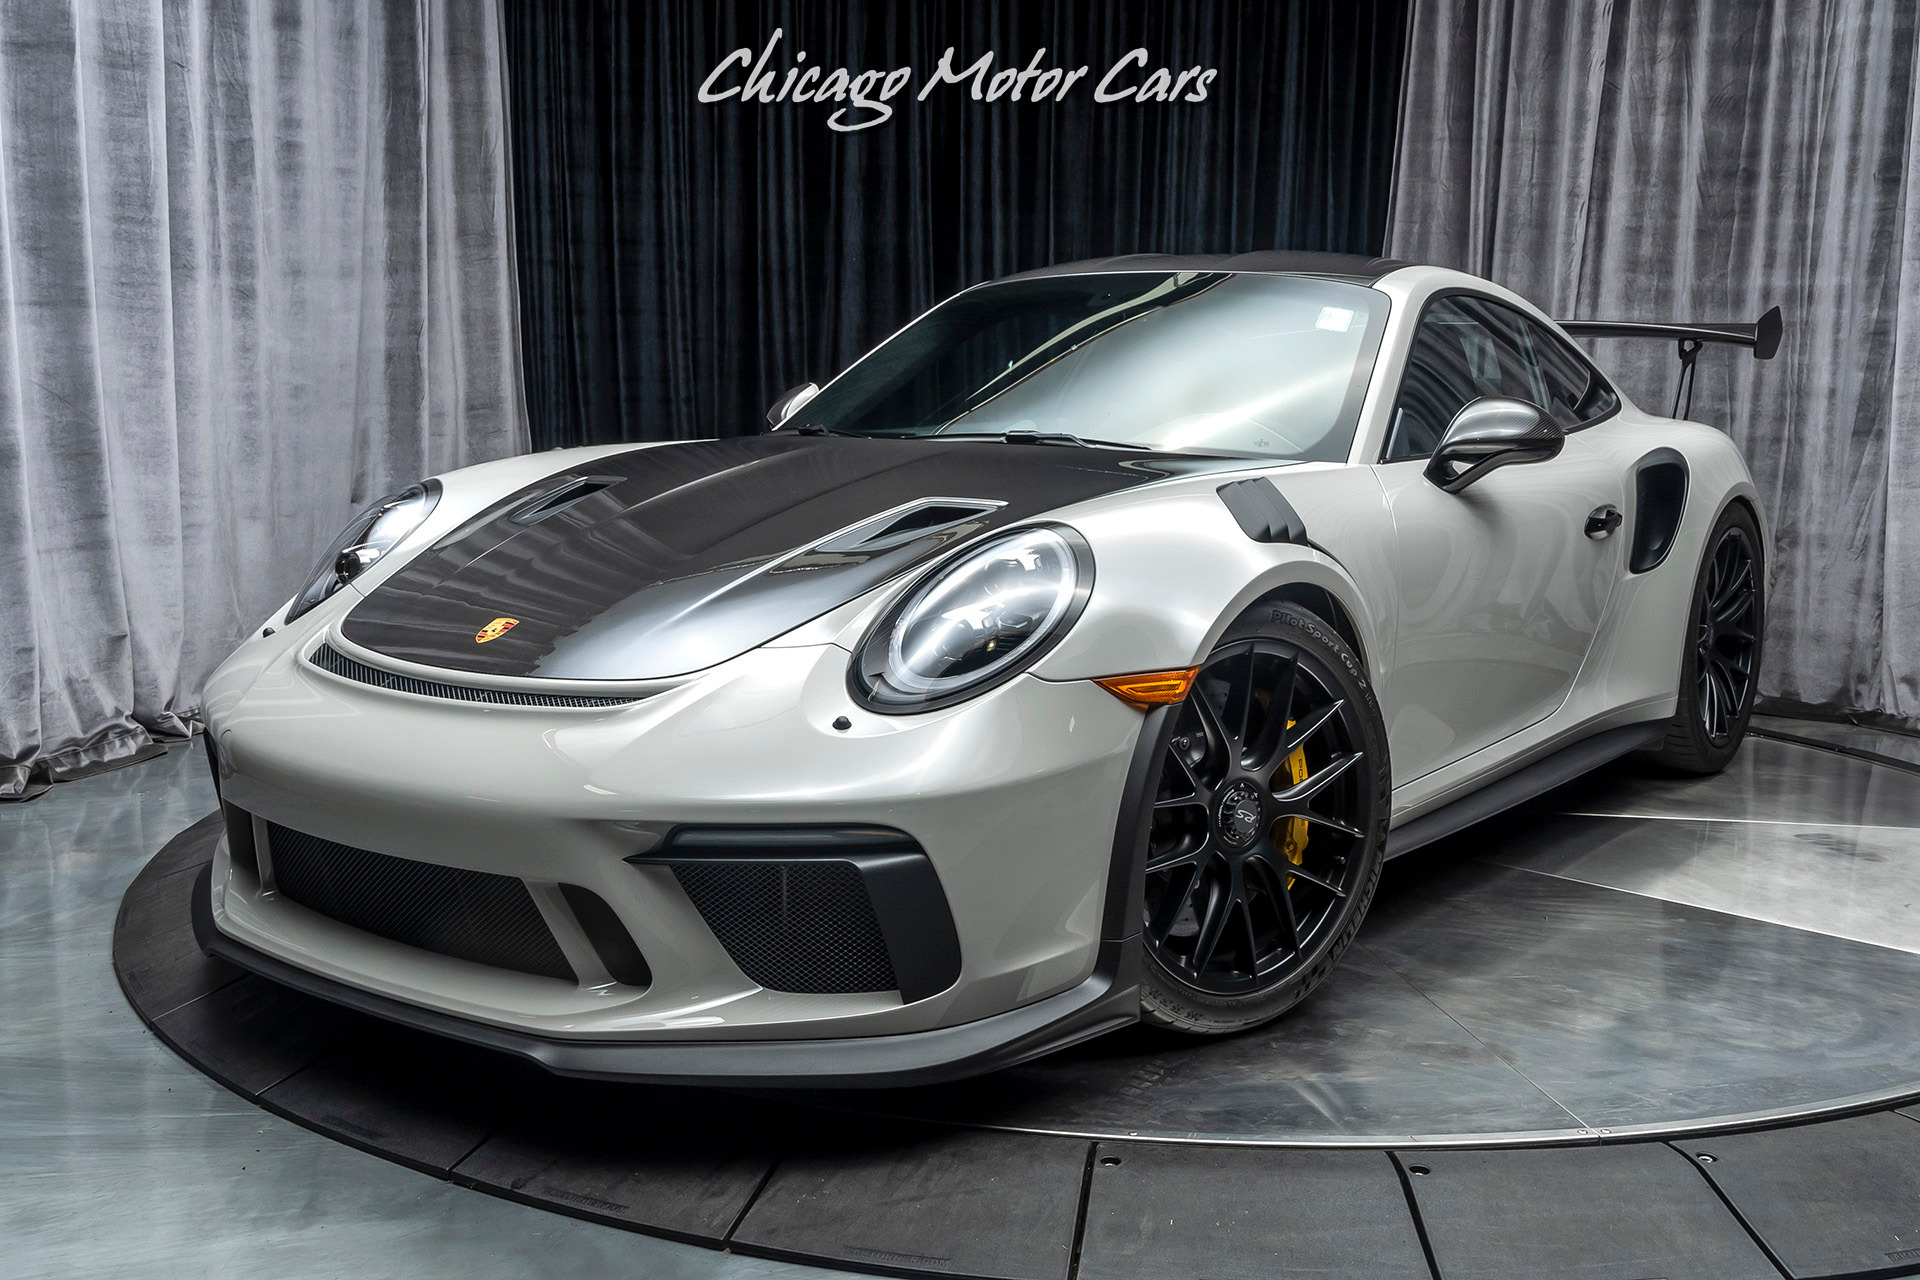 Used 2019 Porsche 911 GT3 RS Weissach Package ONLY 1600 MILES + 